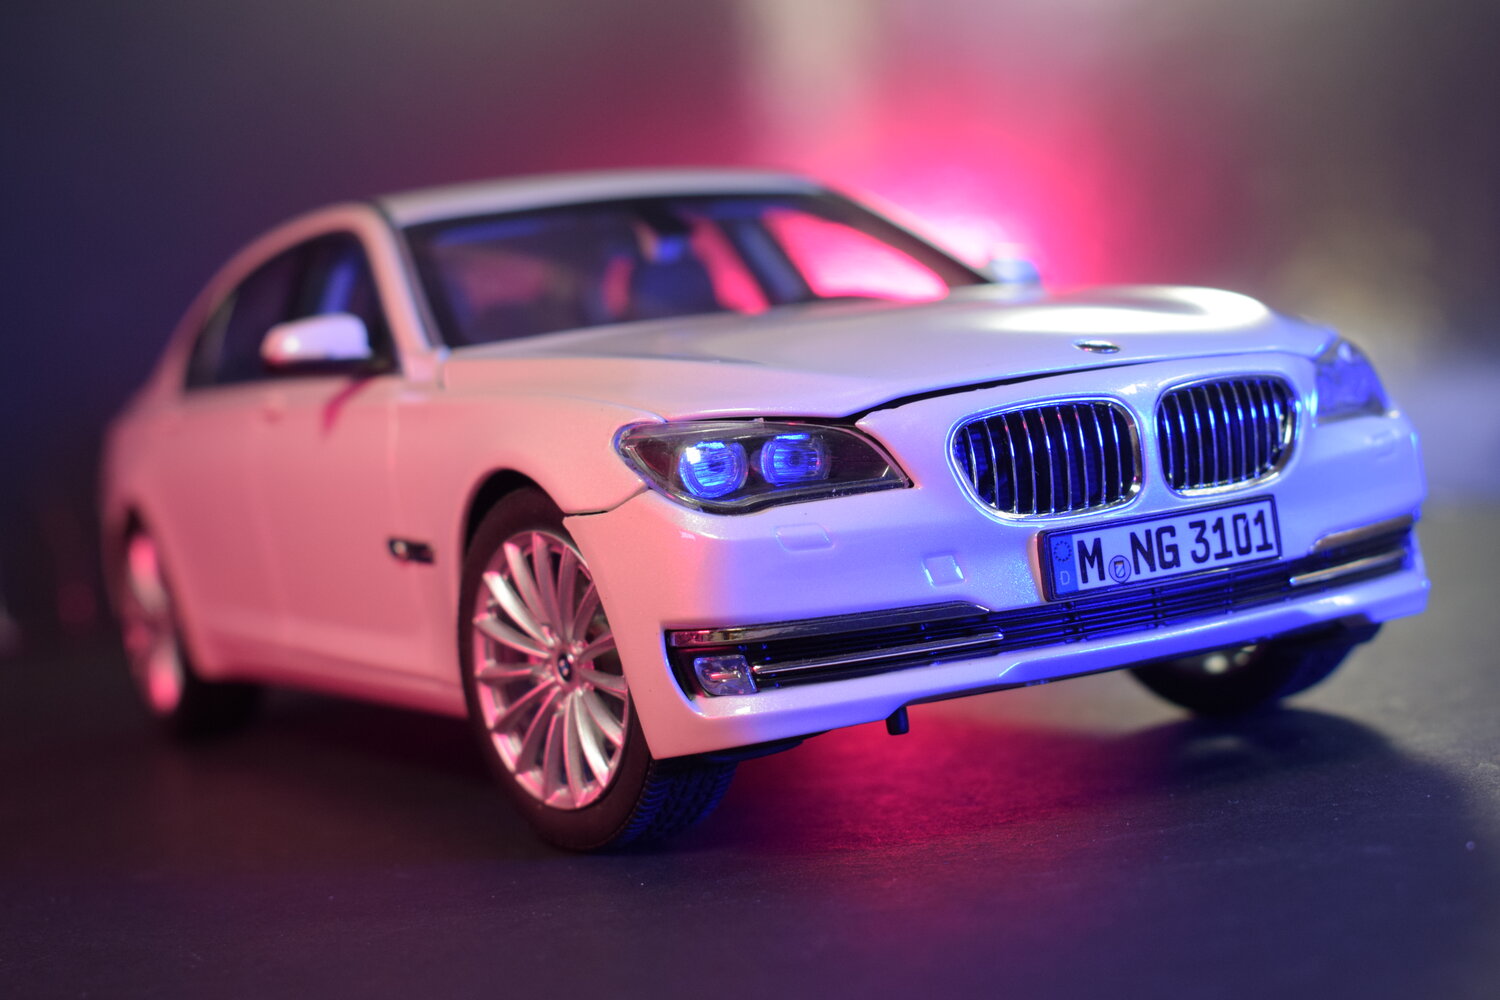 1/18 Scale BMW “7 Series Model Car”Limited Edition & Detailed